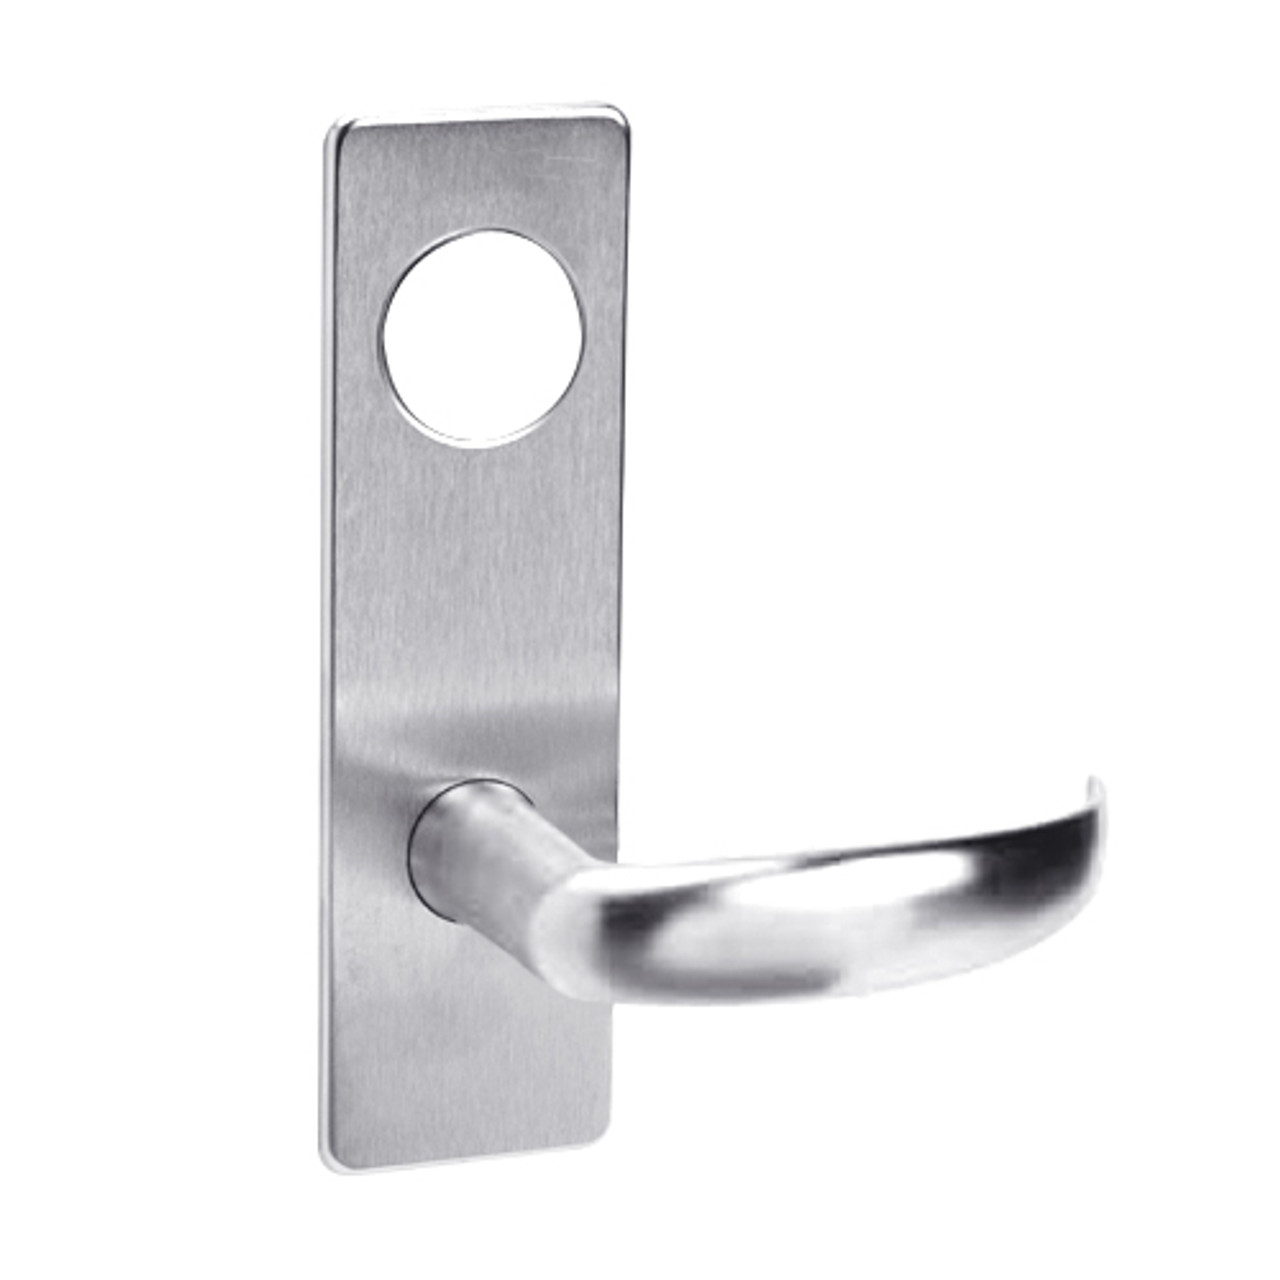 ML2053-PSN-629-LC Corbin Russwin ML2000 Series Mortise Entrance Locksets with Princeton Lever in Bright Stainless Steel